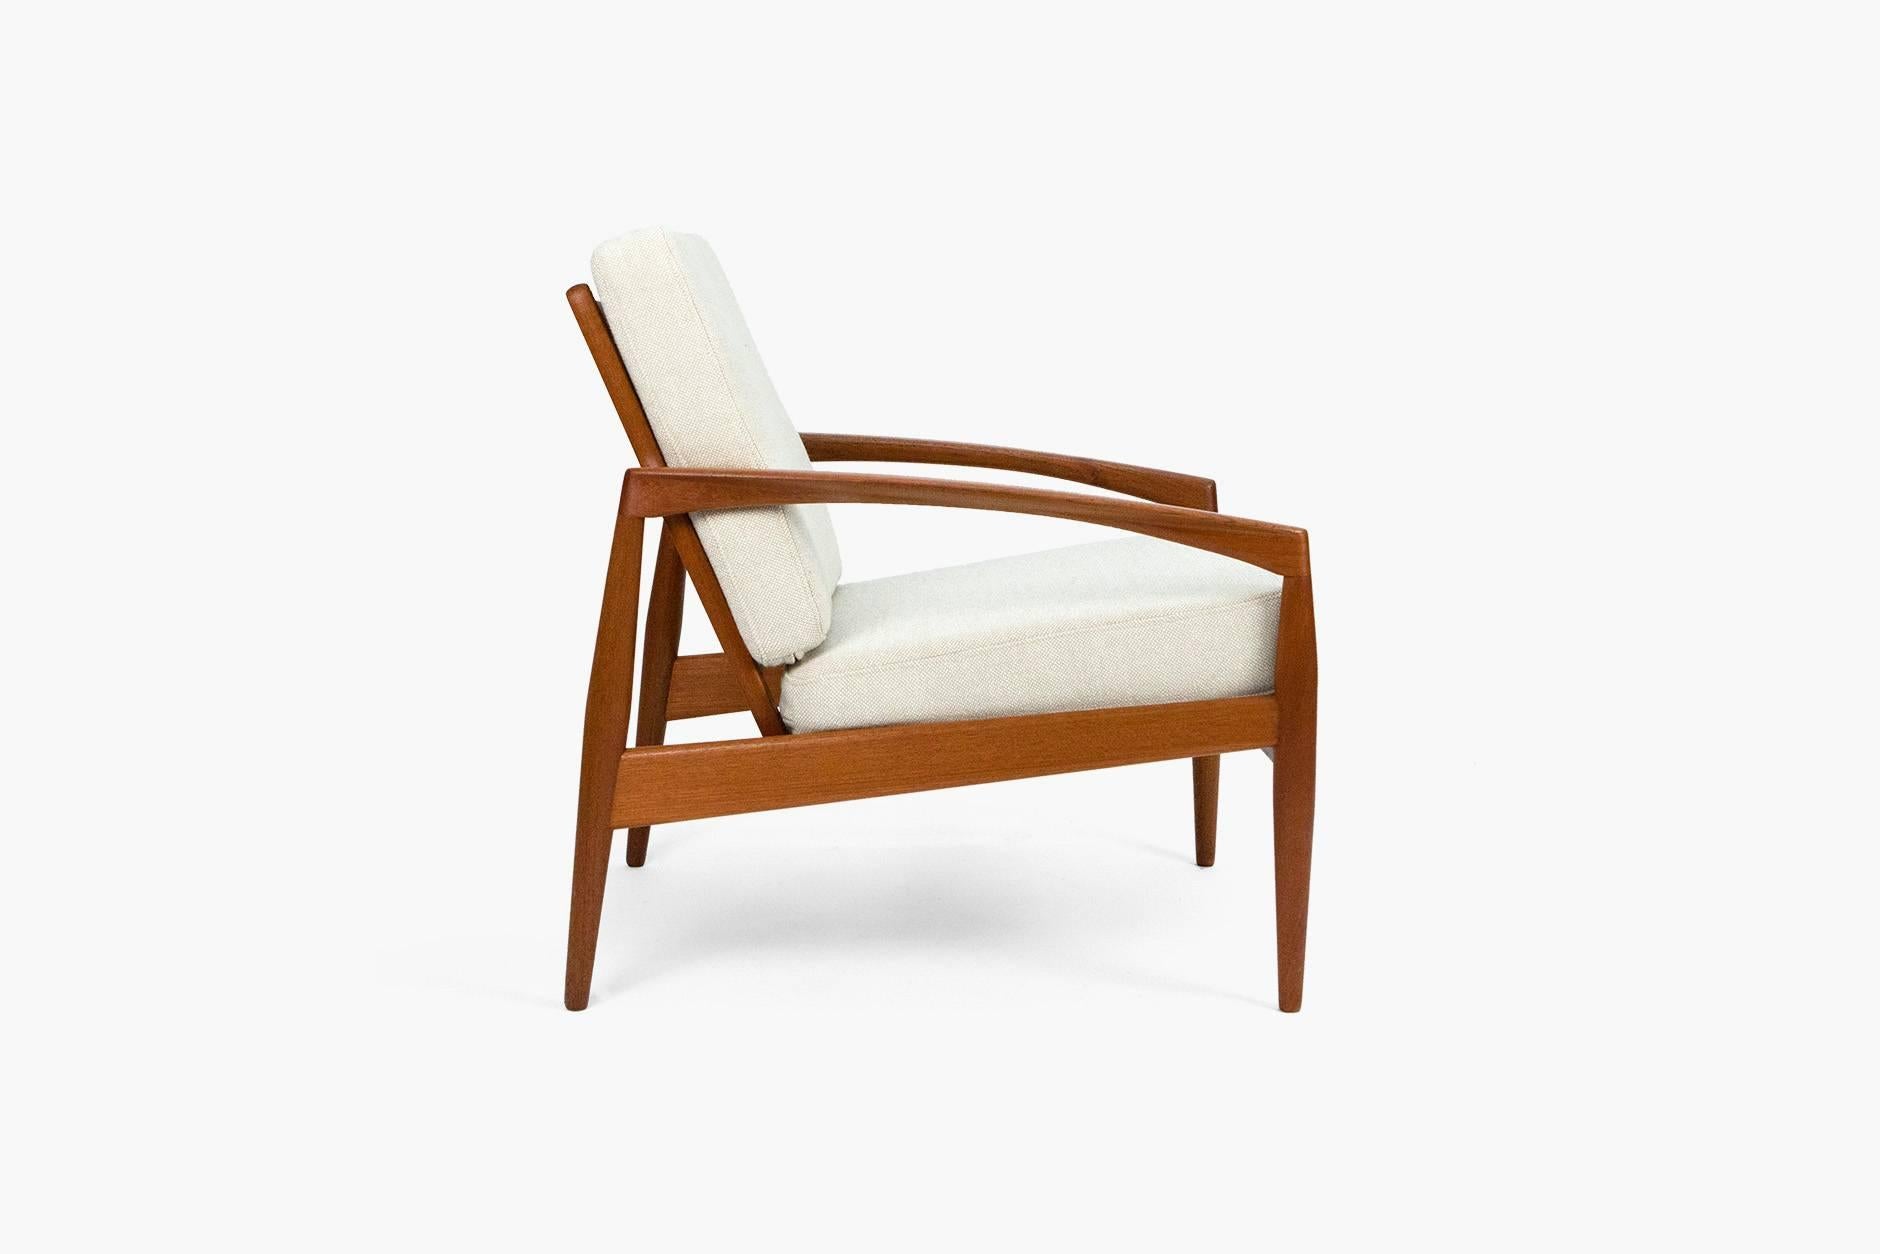 Kai Kristiansen paper knife model 161 chairs, circa 1955. Produced by Magnus Olesen, Denmark. Teak frames with new cushions covered in Kvadrat Hallingdal fabric.